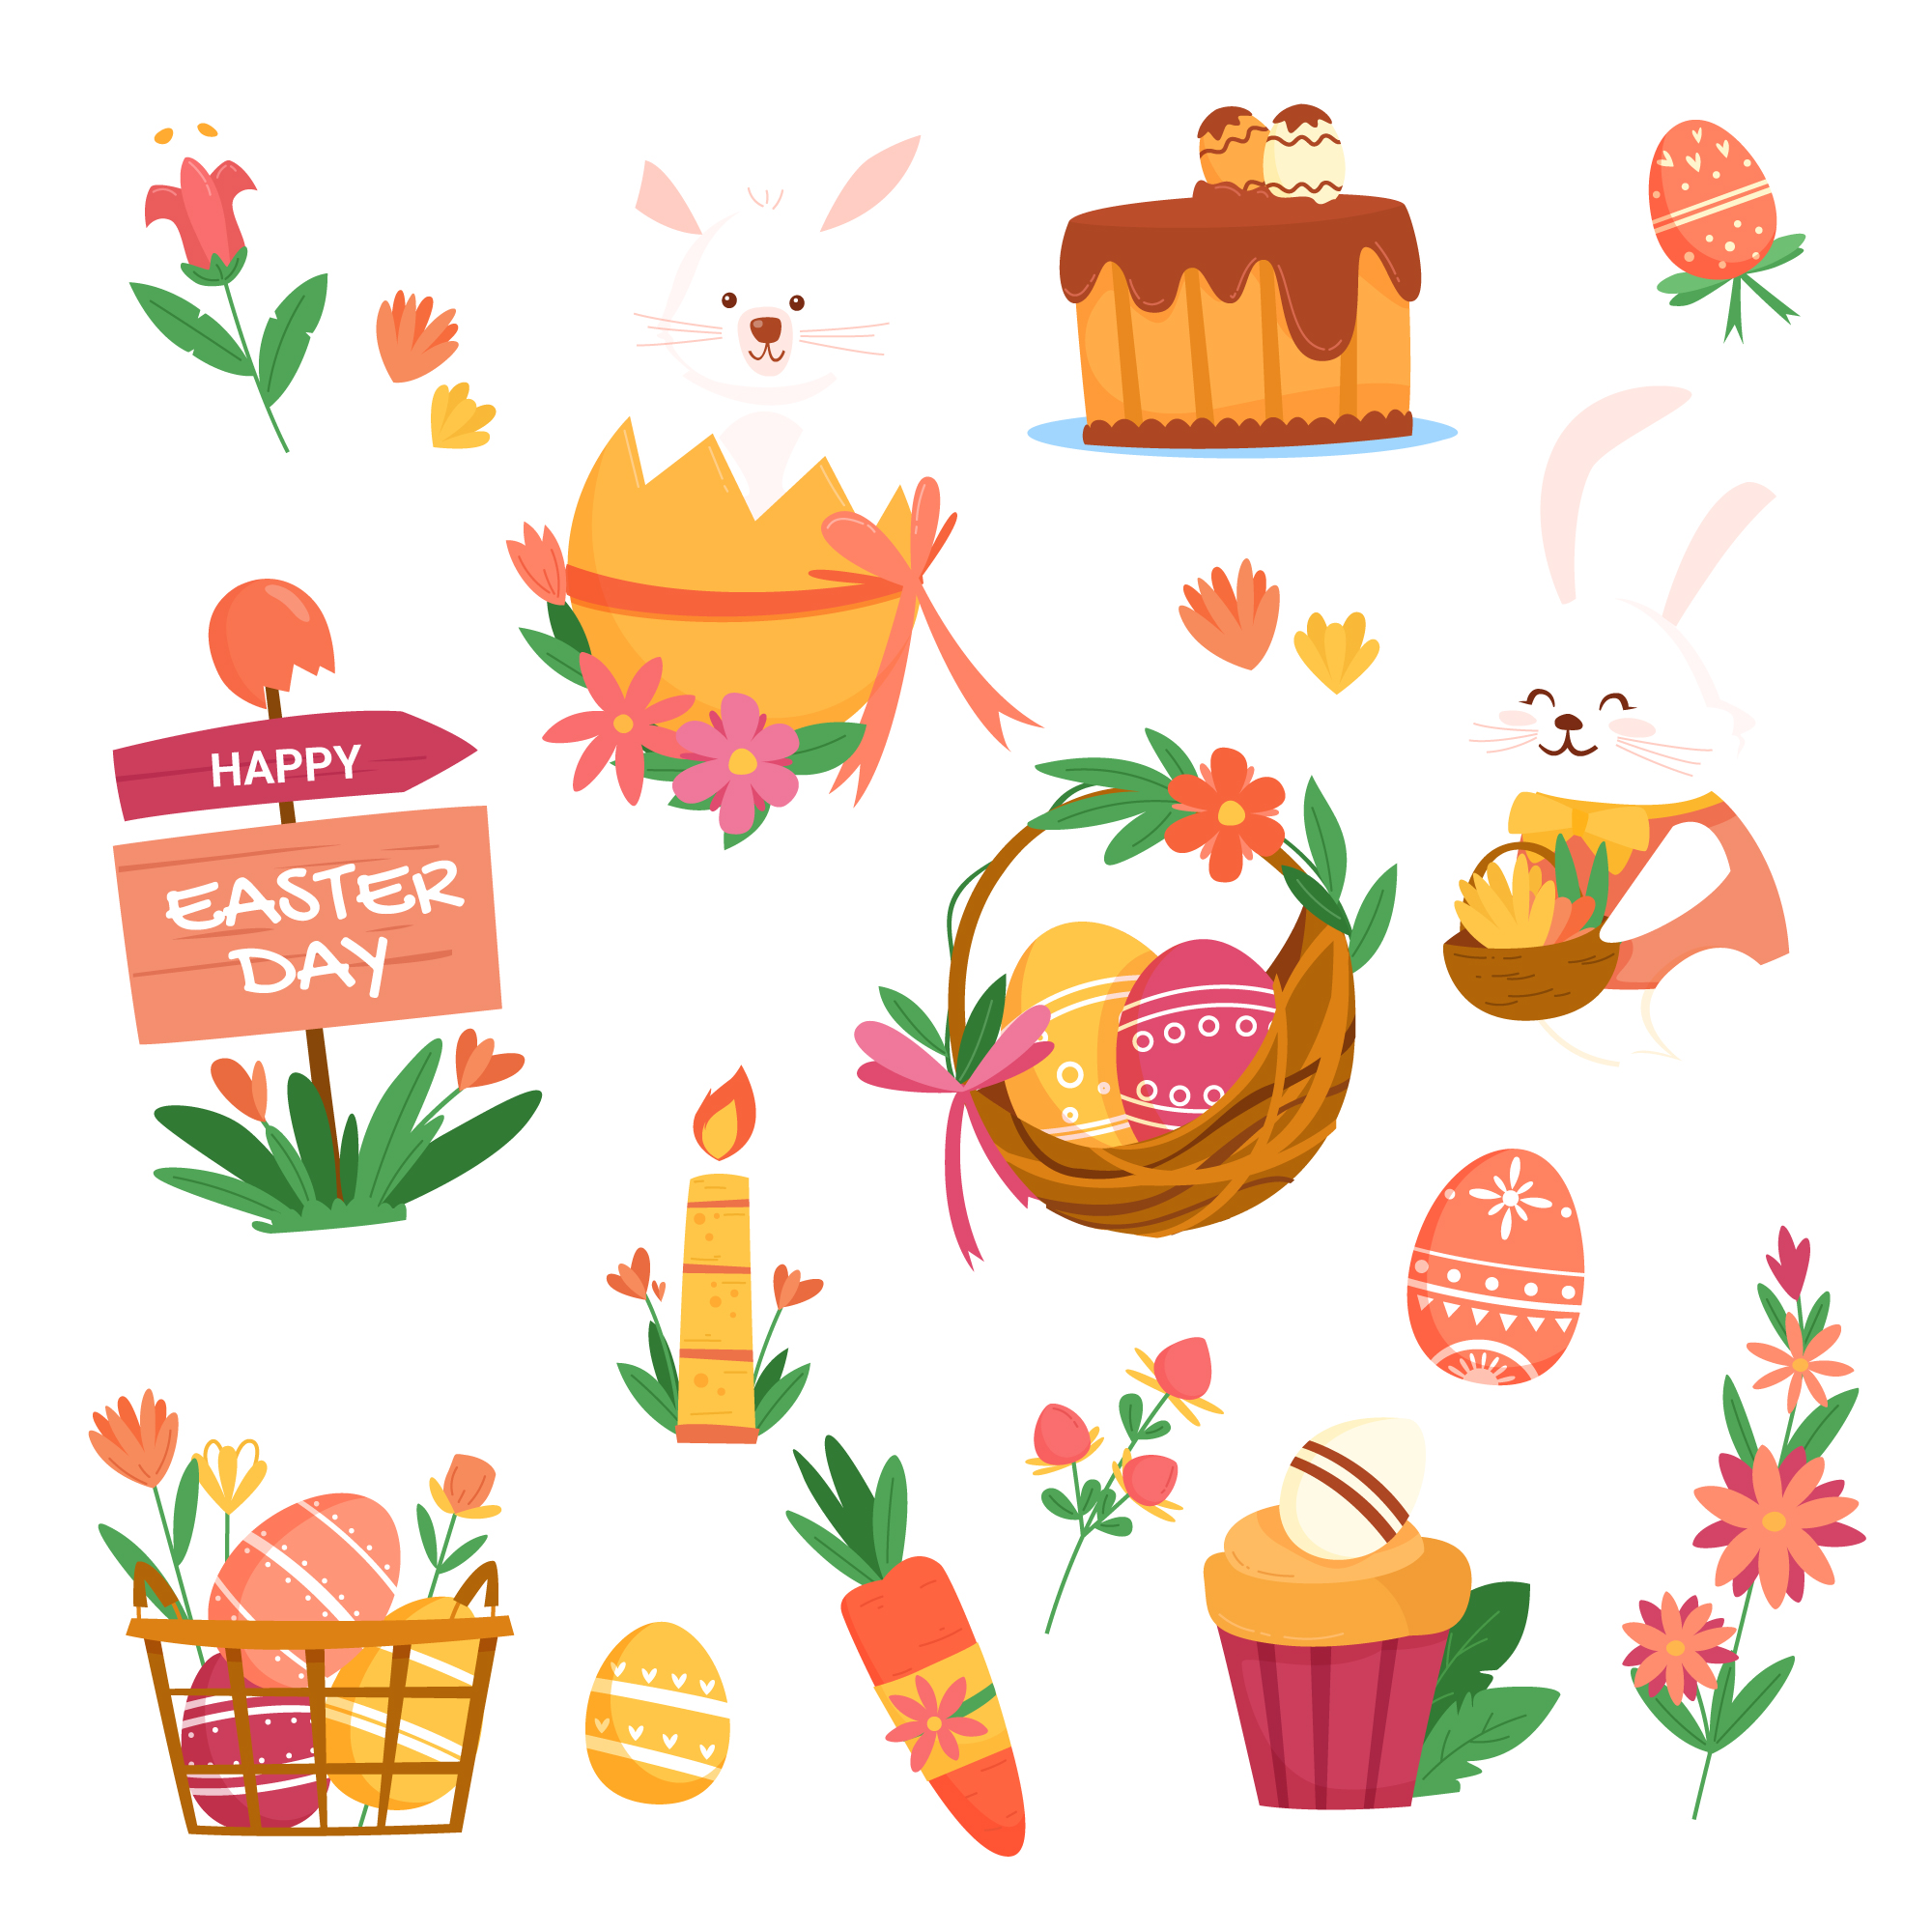 10+ Royalty-Free Easter Clip Art for Download